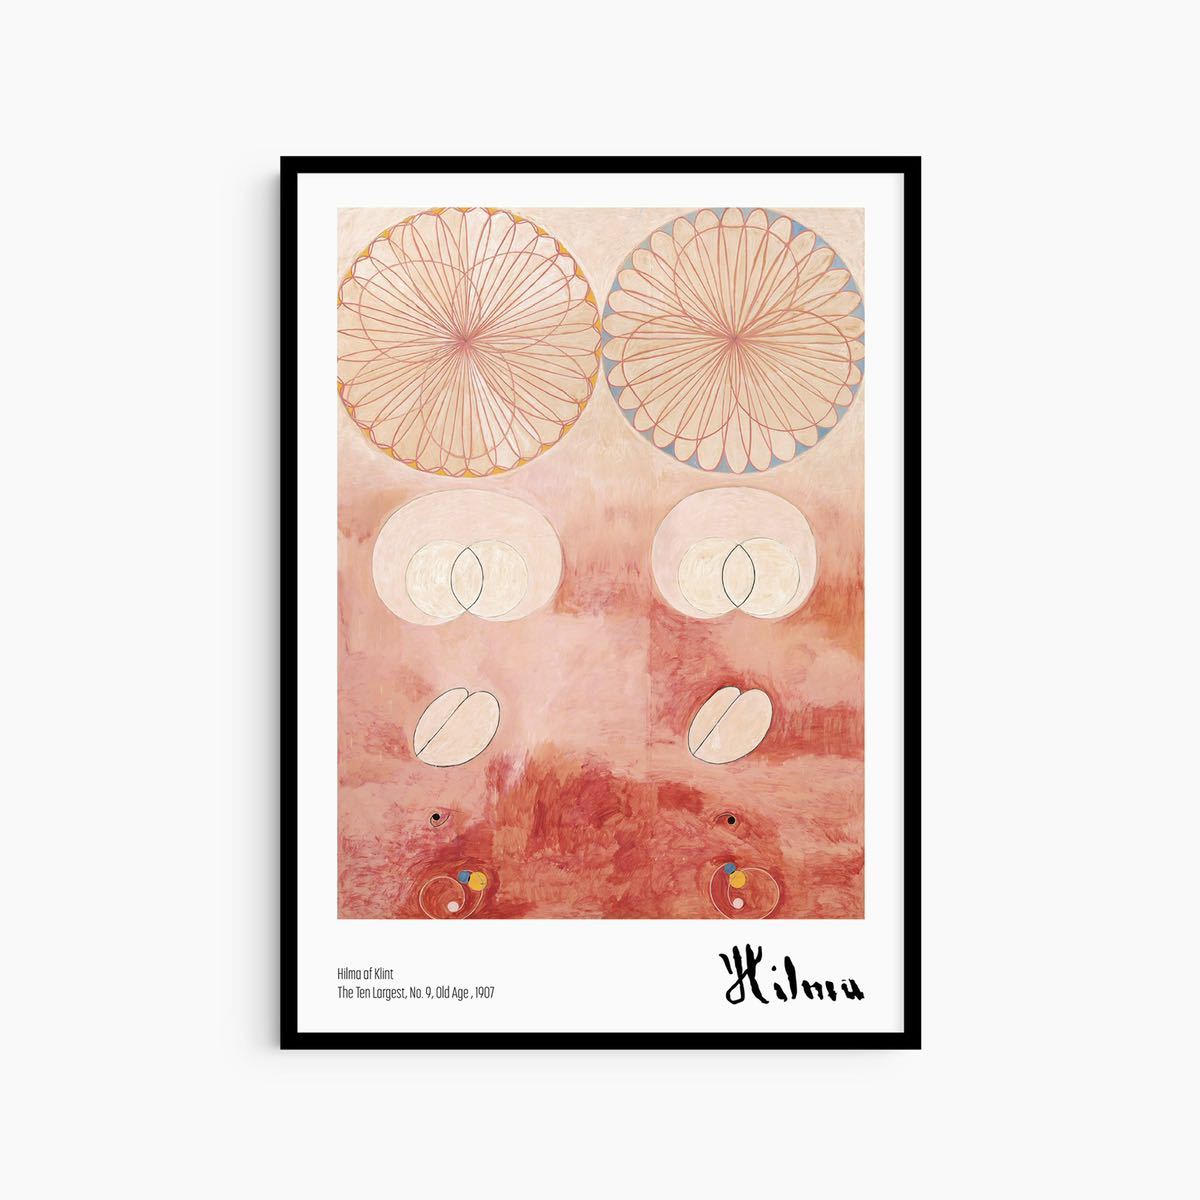 Hilma af Klint Abstract Painting Fine Art Design Painting Poster Vintage Art Modern Art Poster Contemporary Art Colorful A2, Printed materials, Poster, others